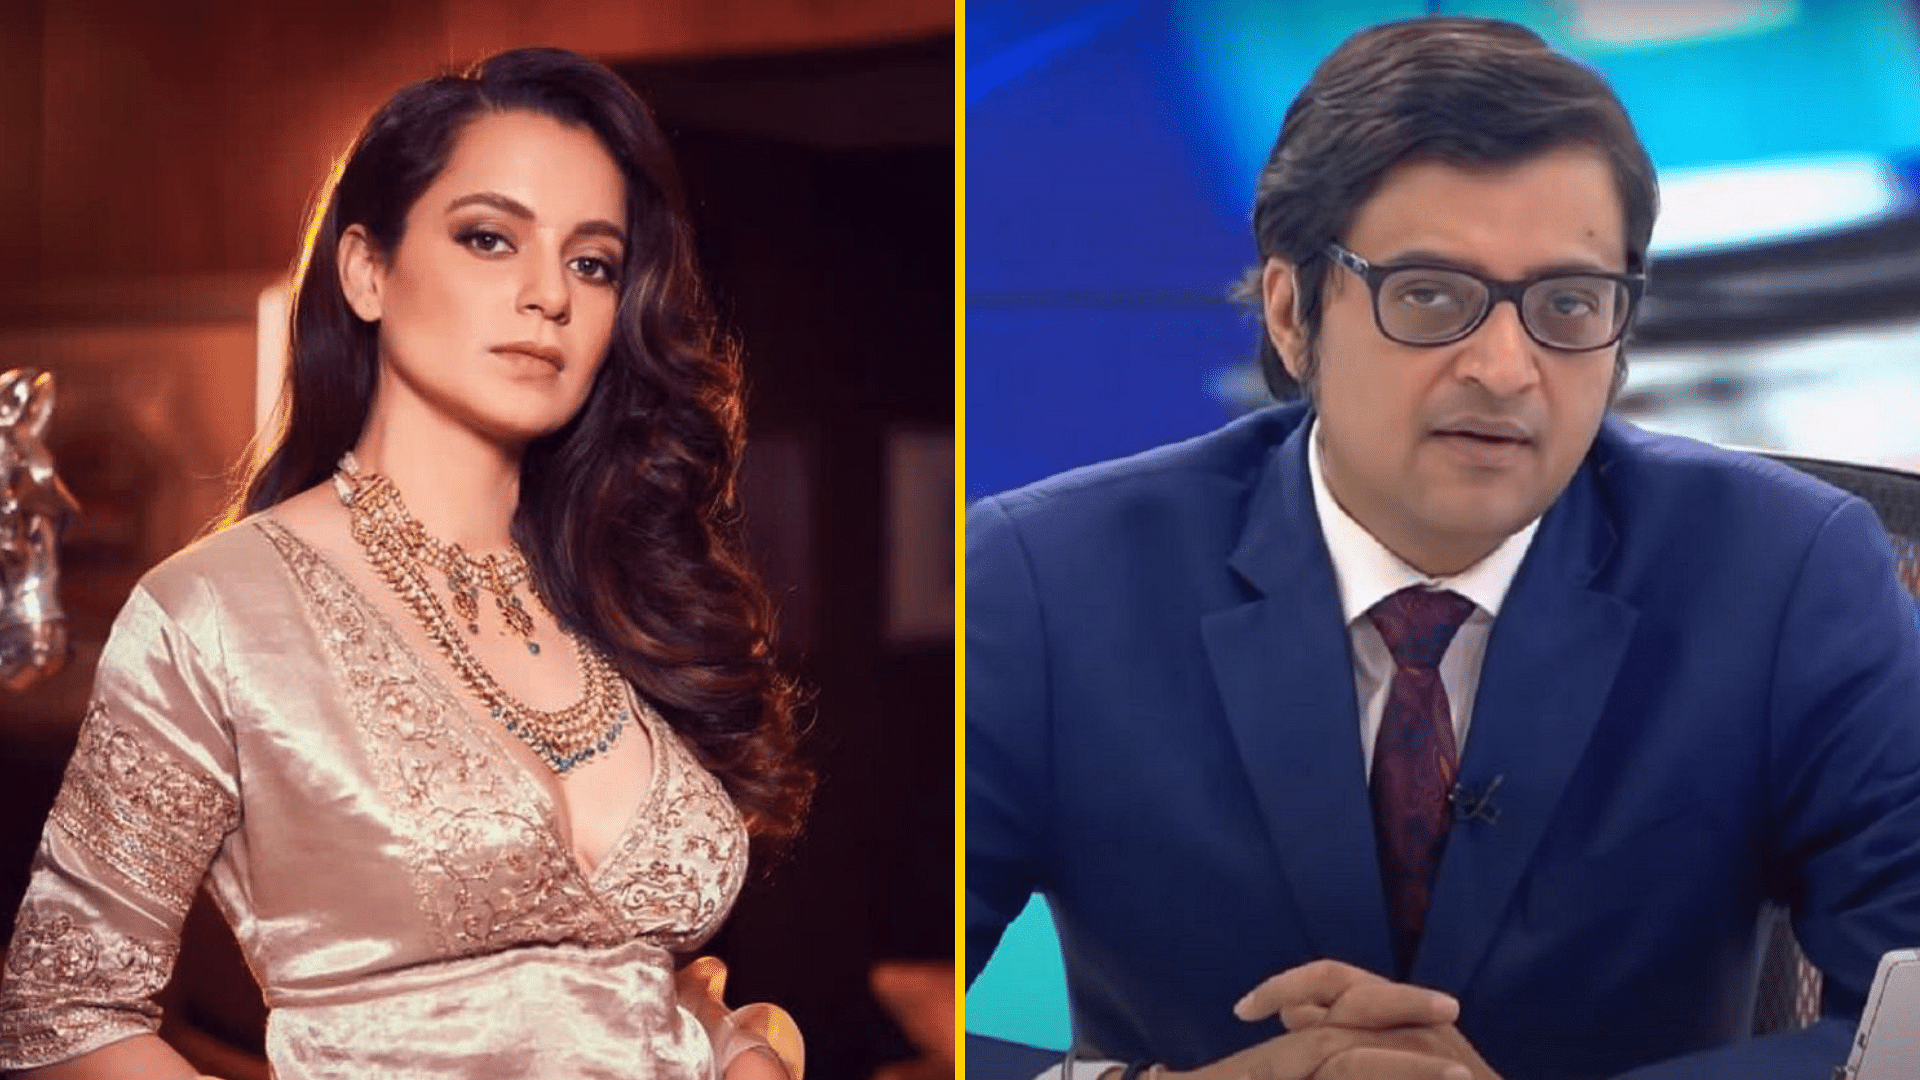 Kangana Ranaut has reacted to the alleged leaked WhatsApp chats of Republic TV founder Arnab Goswami.